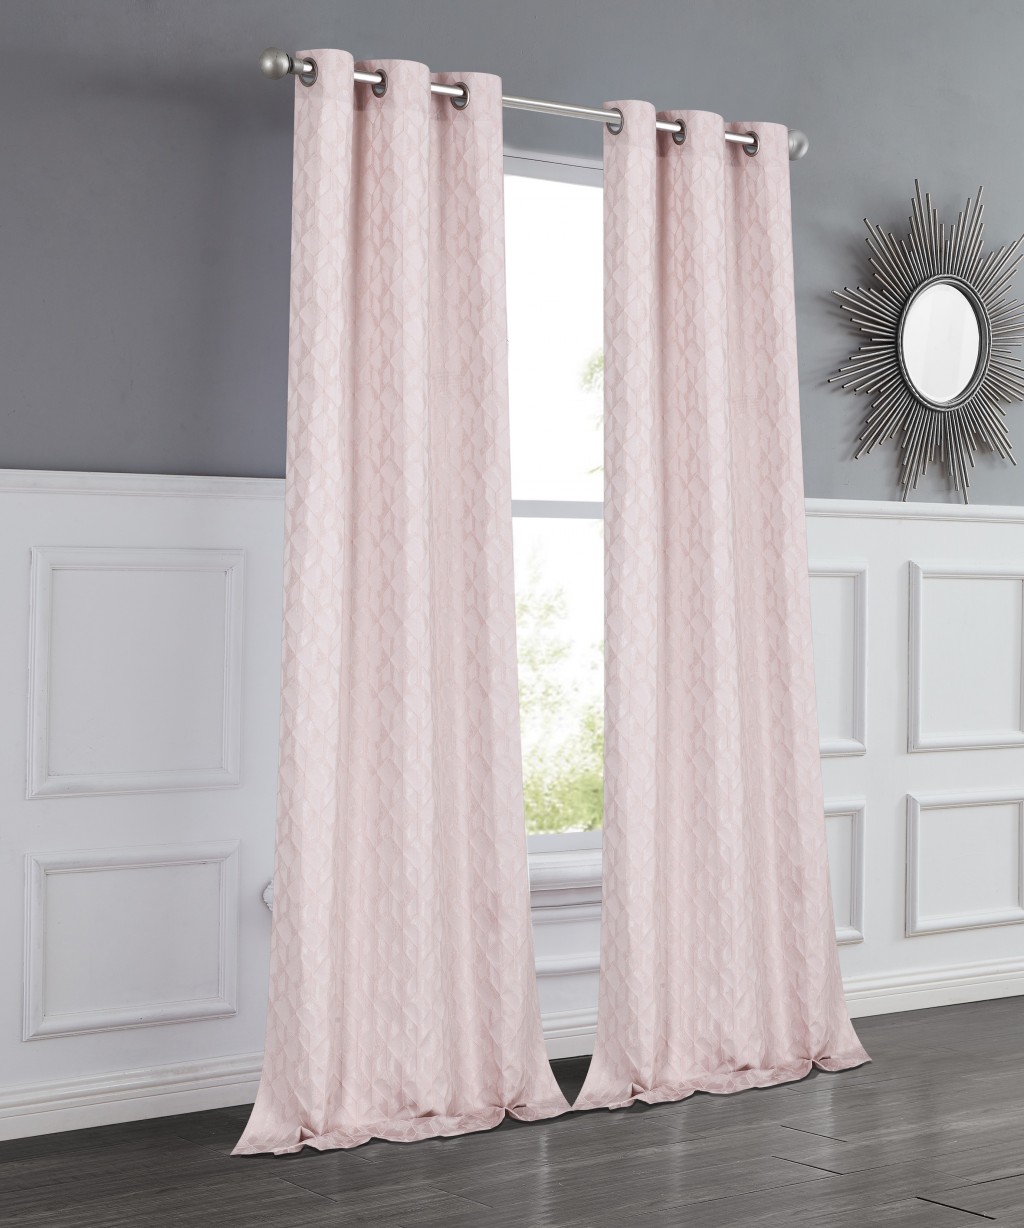 Set of Two 84" Blush Textured Window Curtain Panels